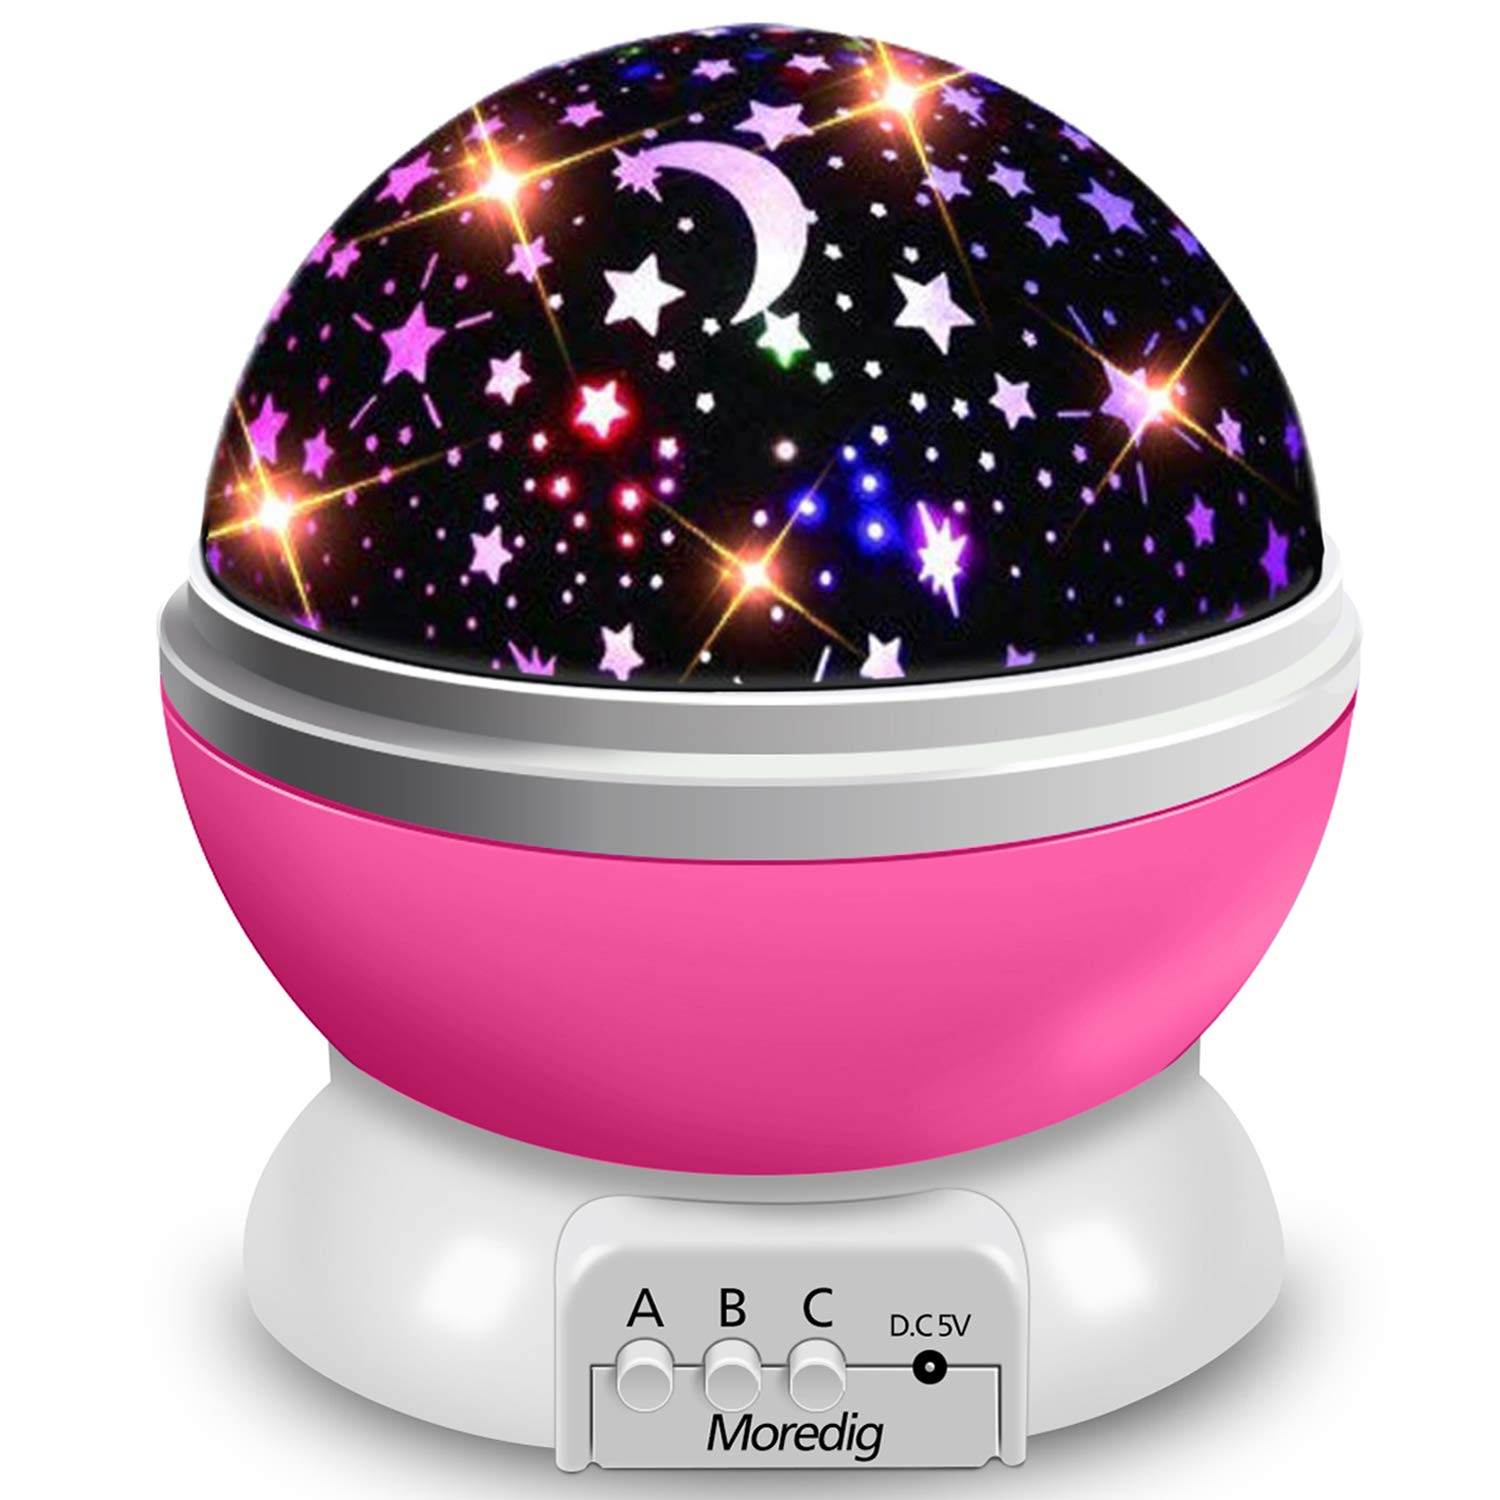 Moredig Star Projector Night Light, Baby Night Light Rotation LED Night Light Lamp with 8 Colorful Lights for Baby Nursery Bedroom Decorate - Pink